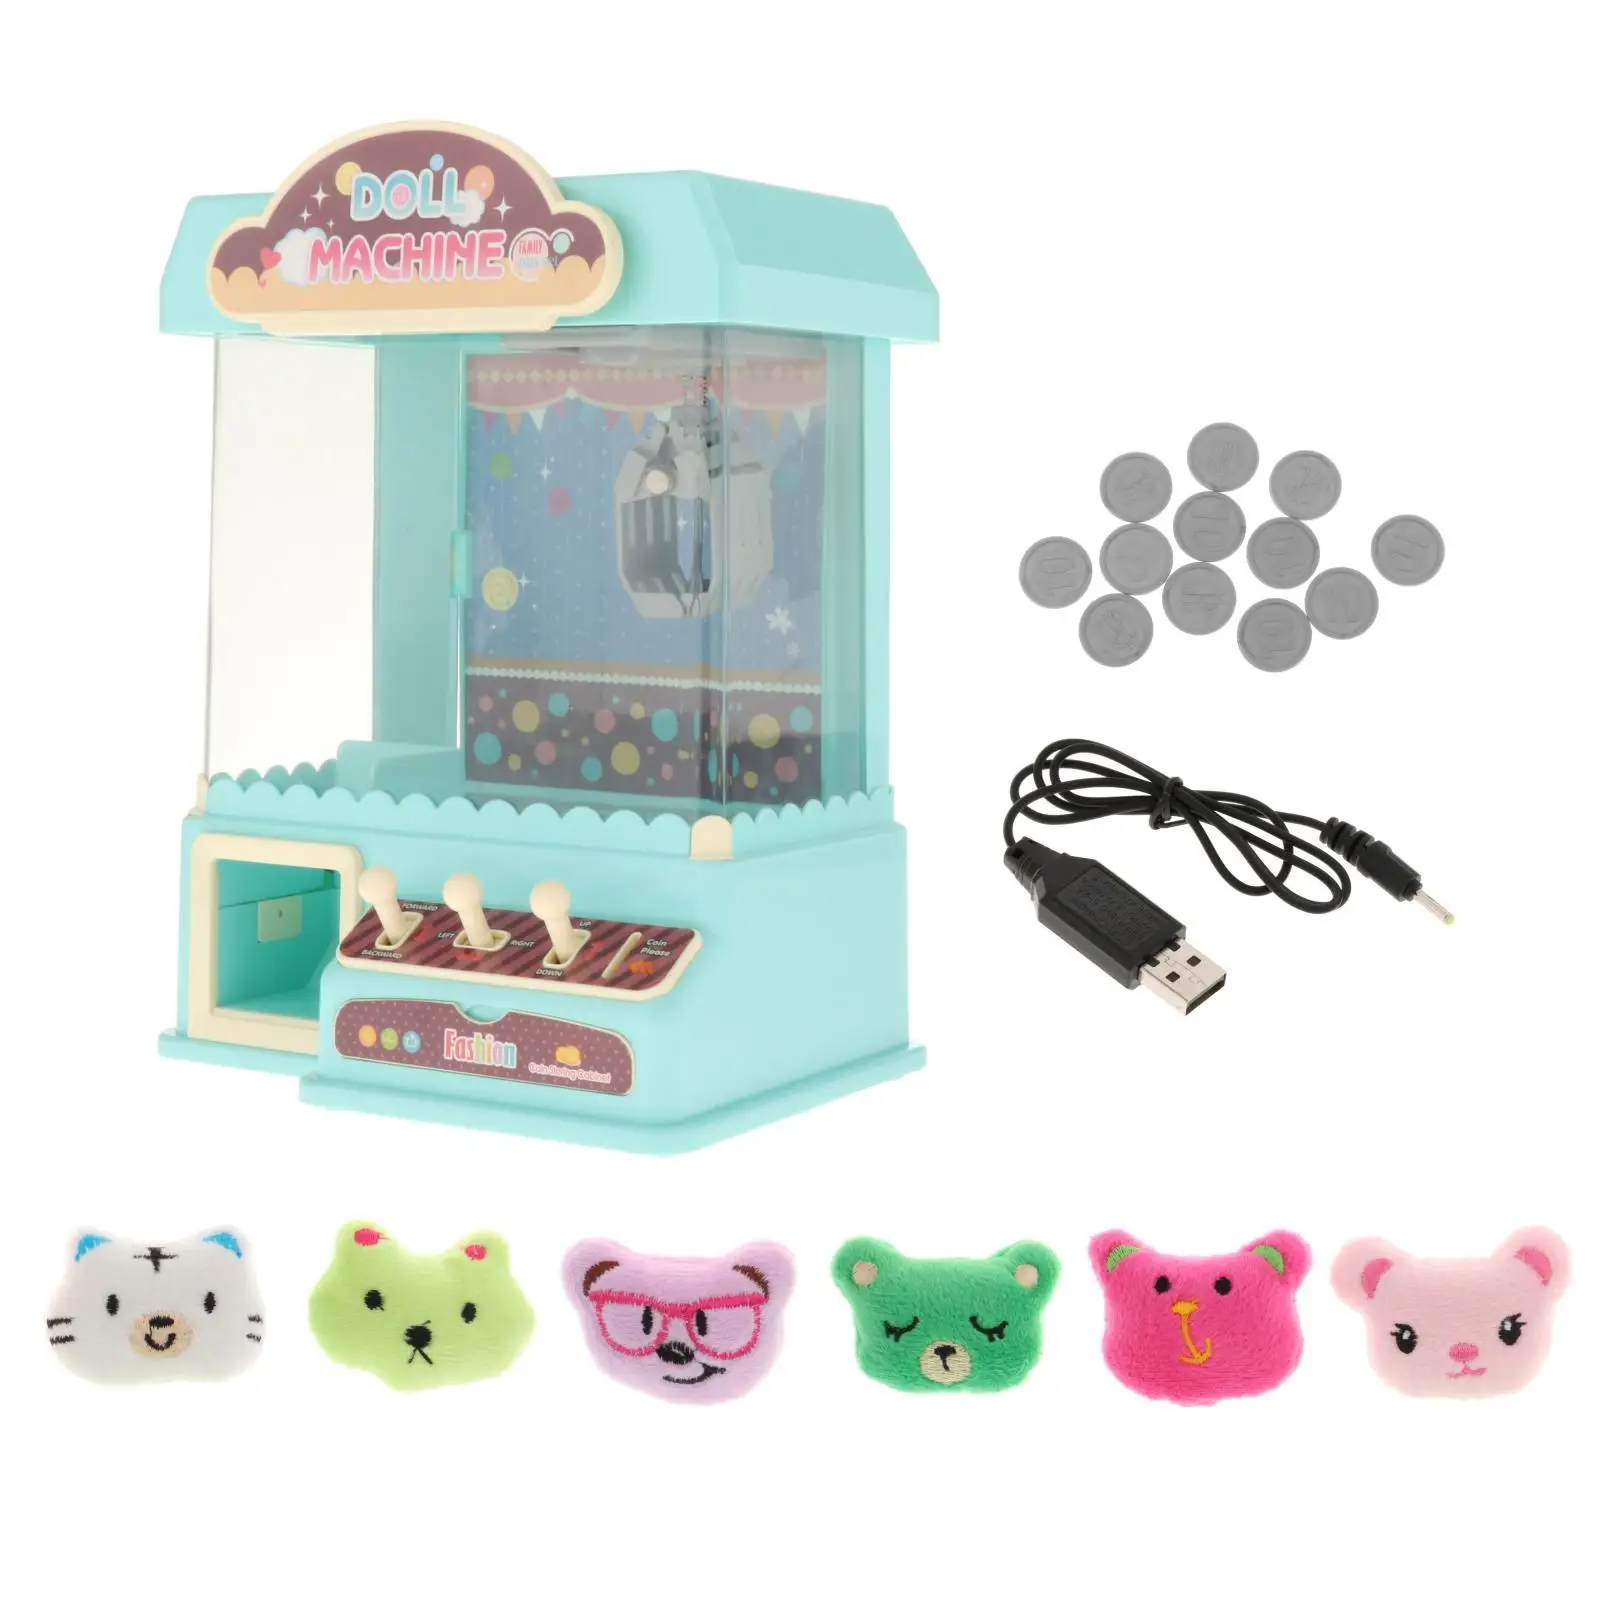 Rechargeable Electronic Claw Game and 10 Capsules Play House Dollhouse Gifts Vending Grabber Machine for Kids Birthday Gifts